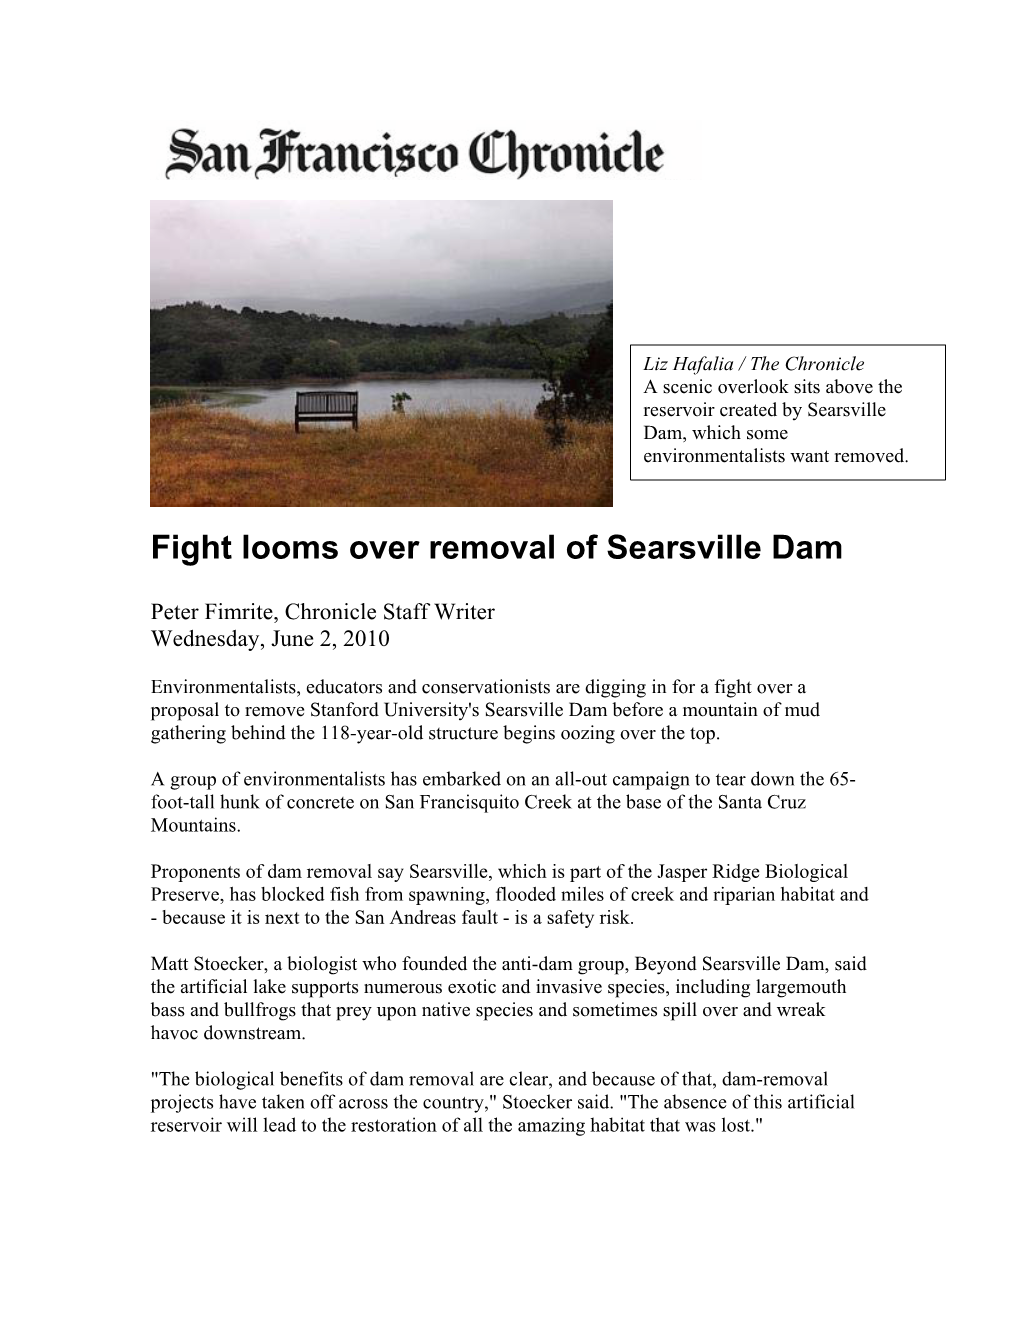 Fight Looms Over Removal of Searsville Dam